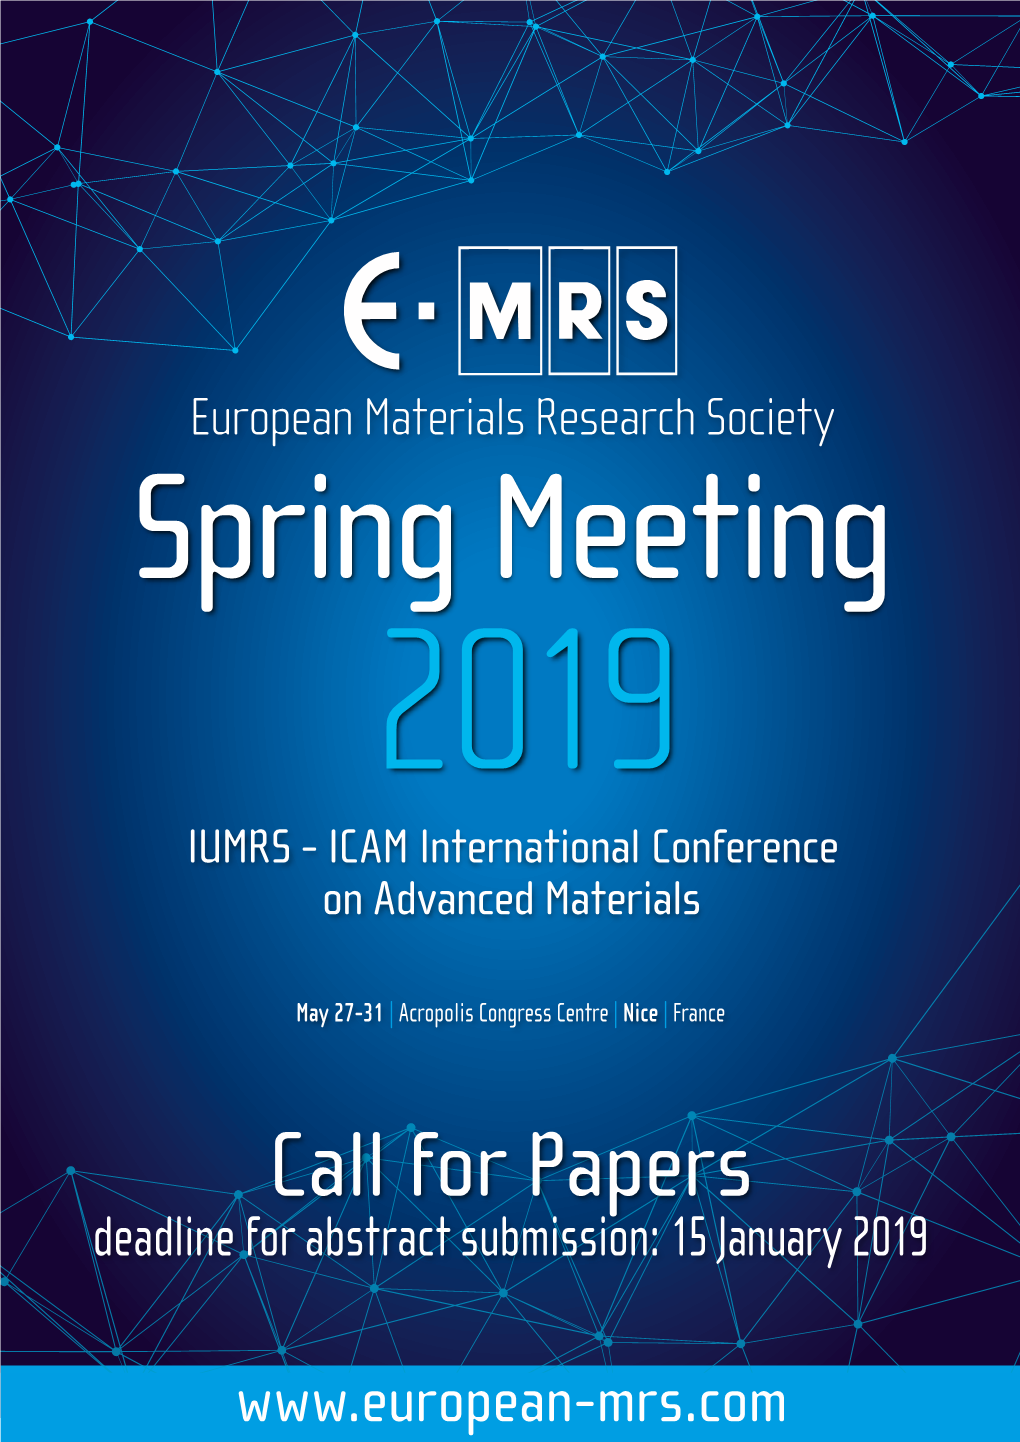 Call for Papers Deadline for Abstract Submission: 15 January 2019